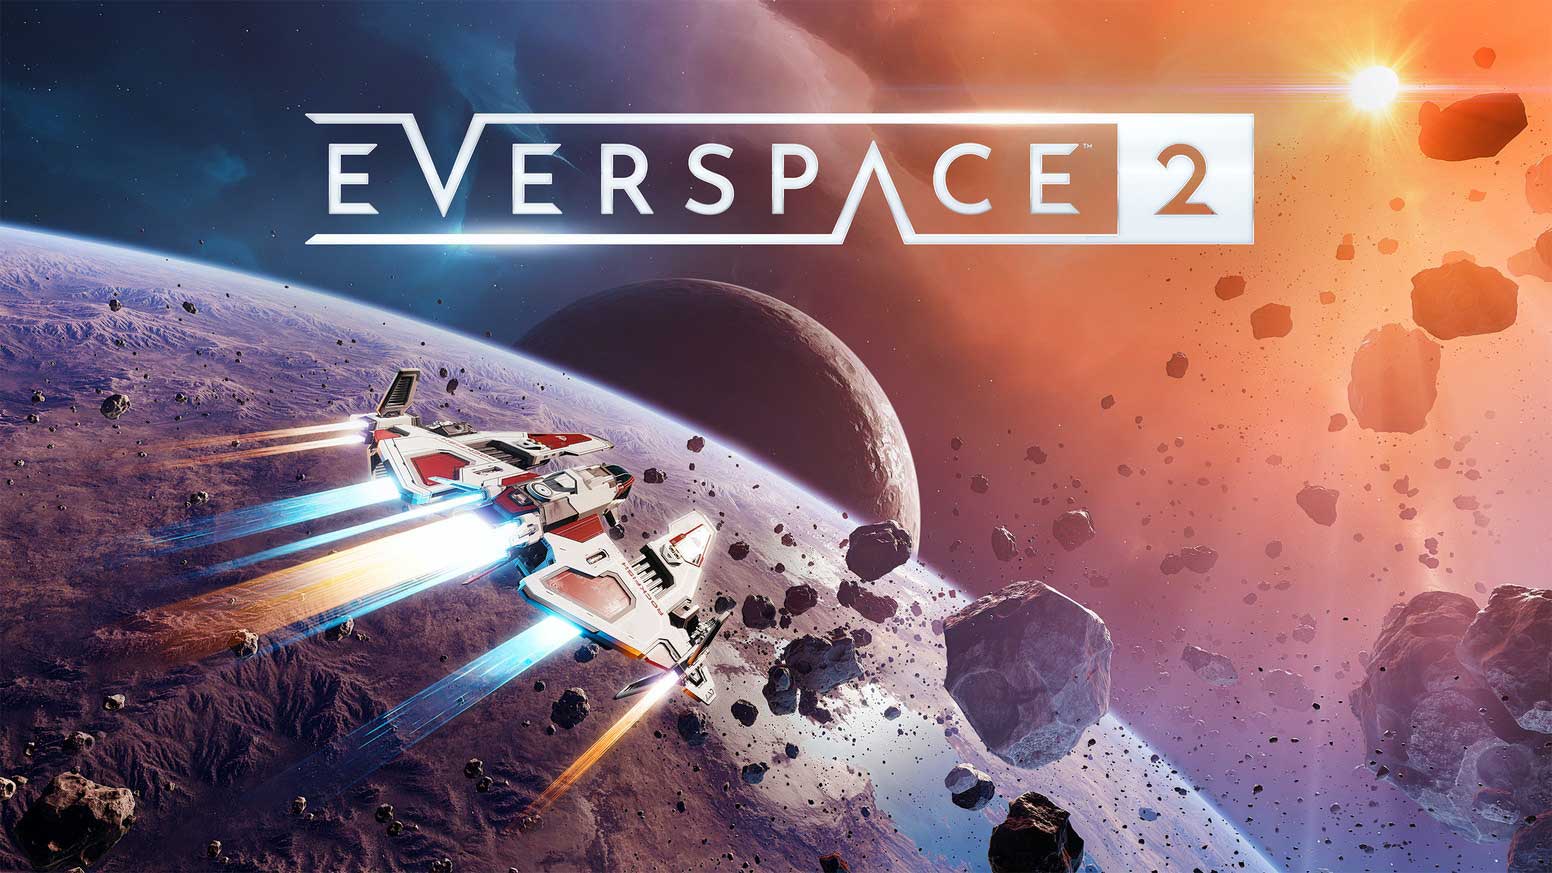 Everspace 2 Arrives on Steam and GOG Later This Month